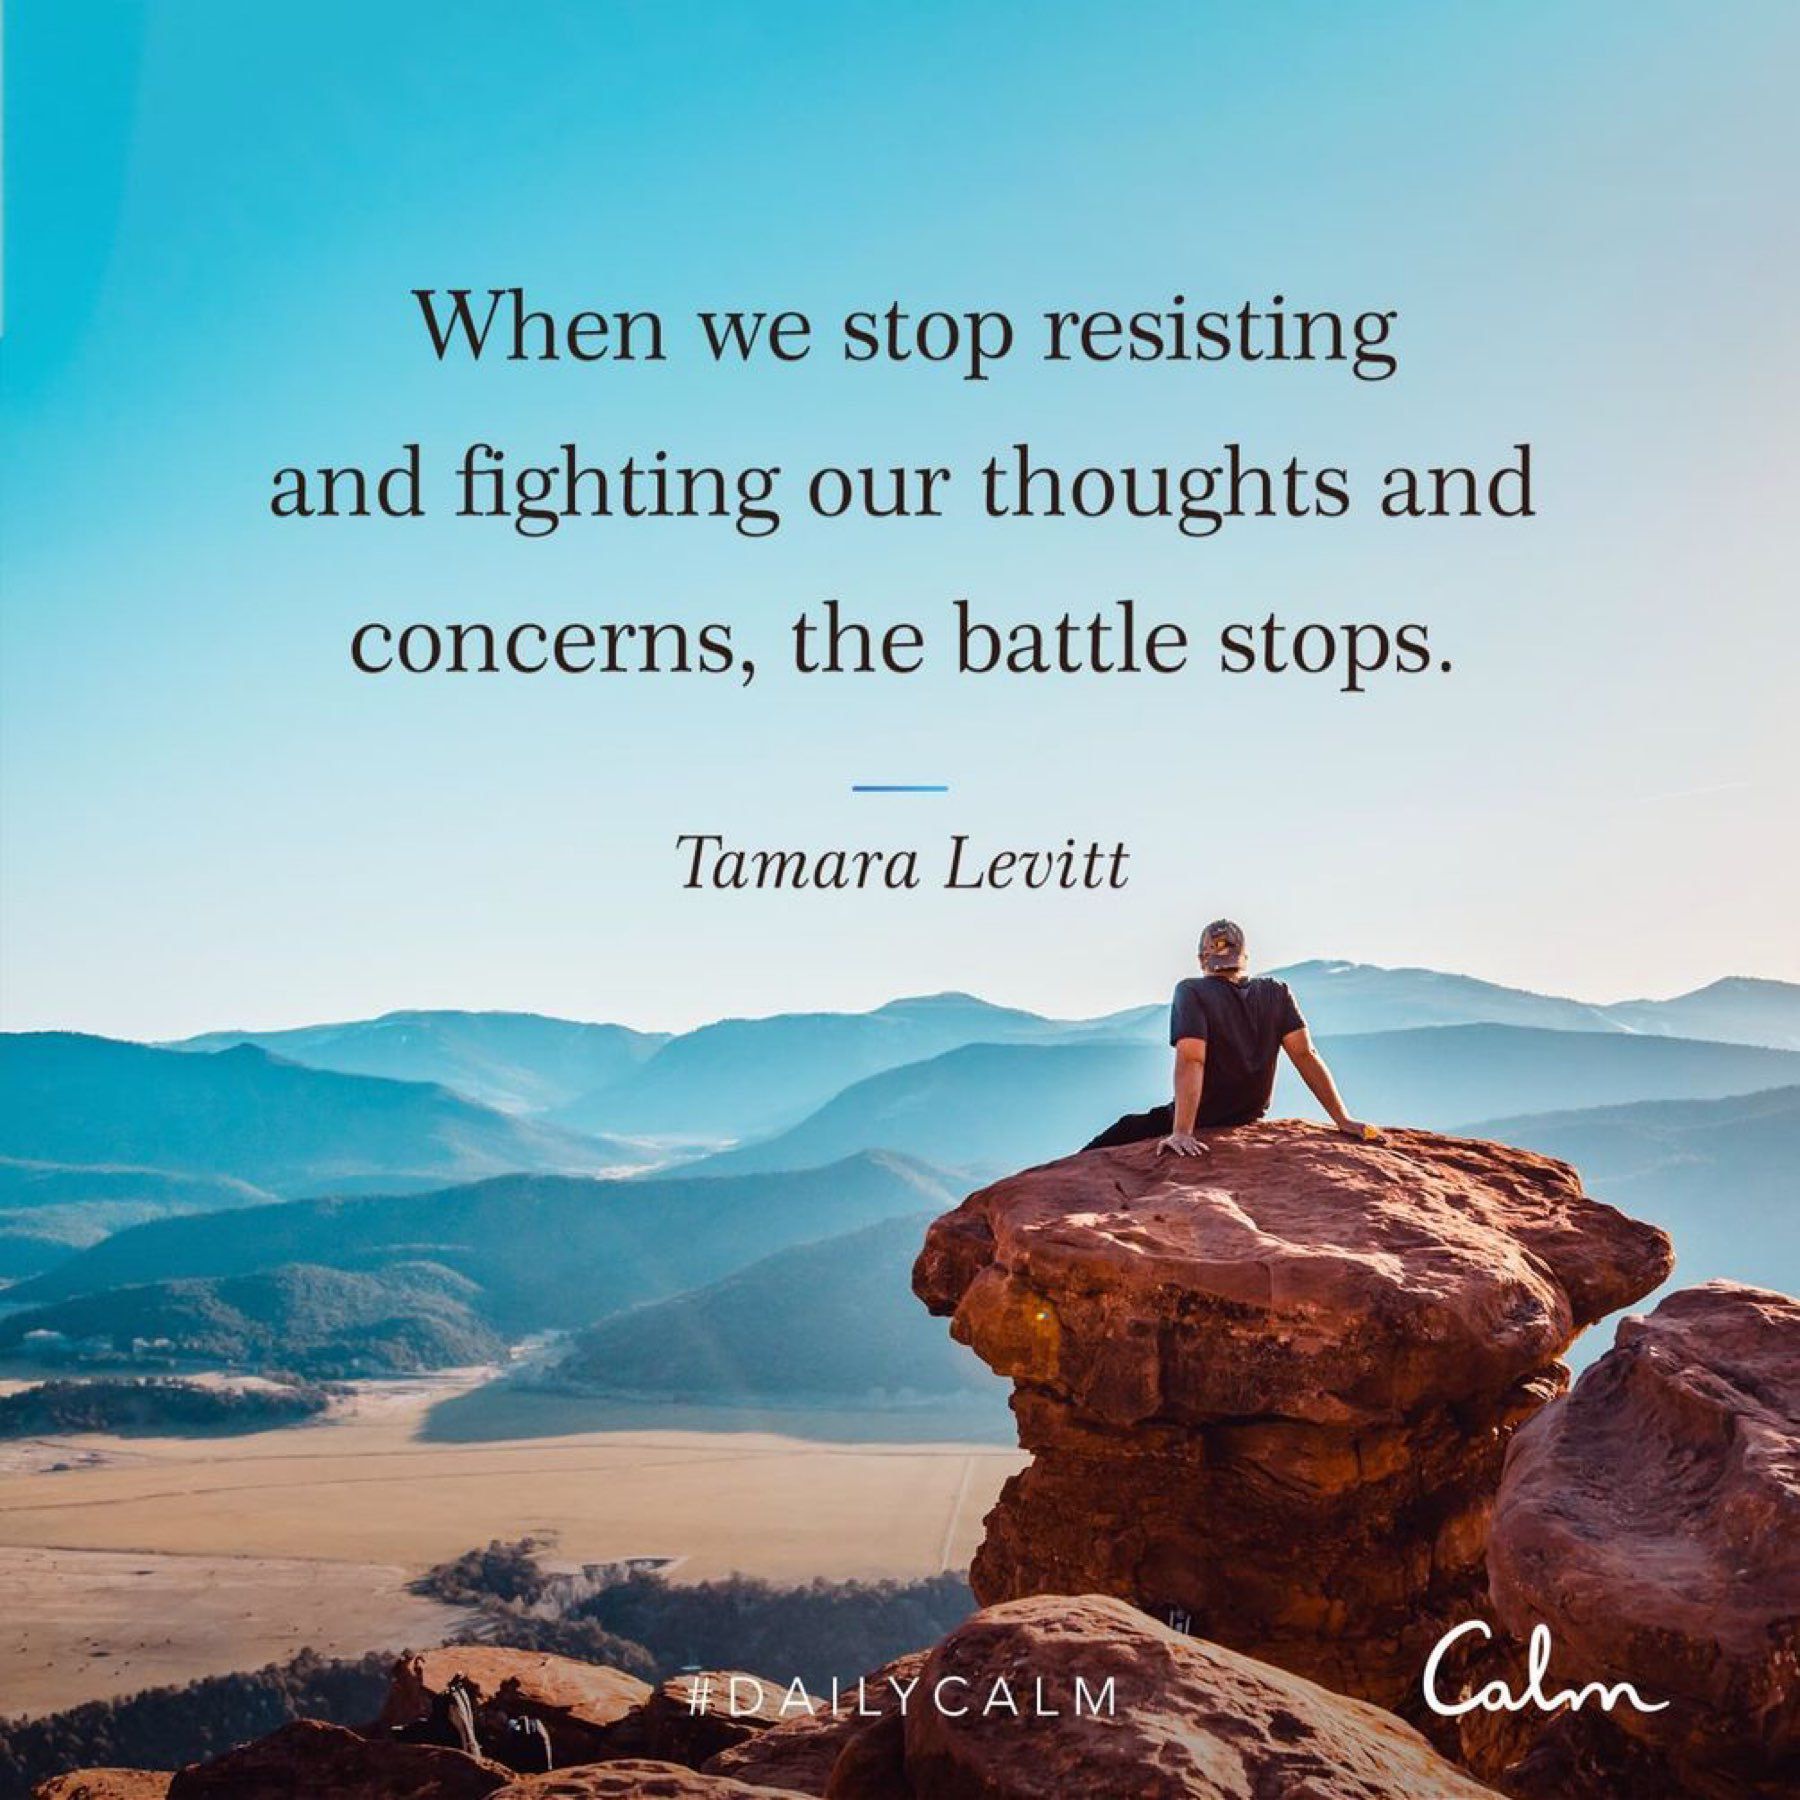 When we stop resisting our thoughts, the battle is over